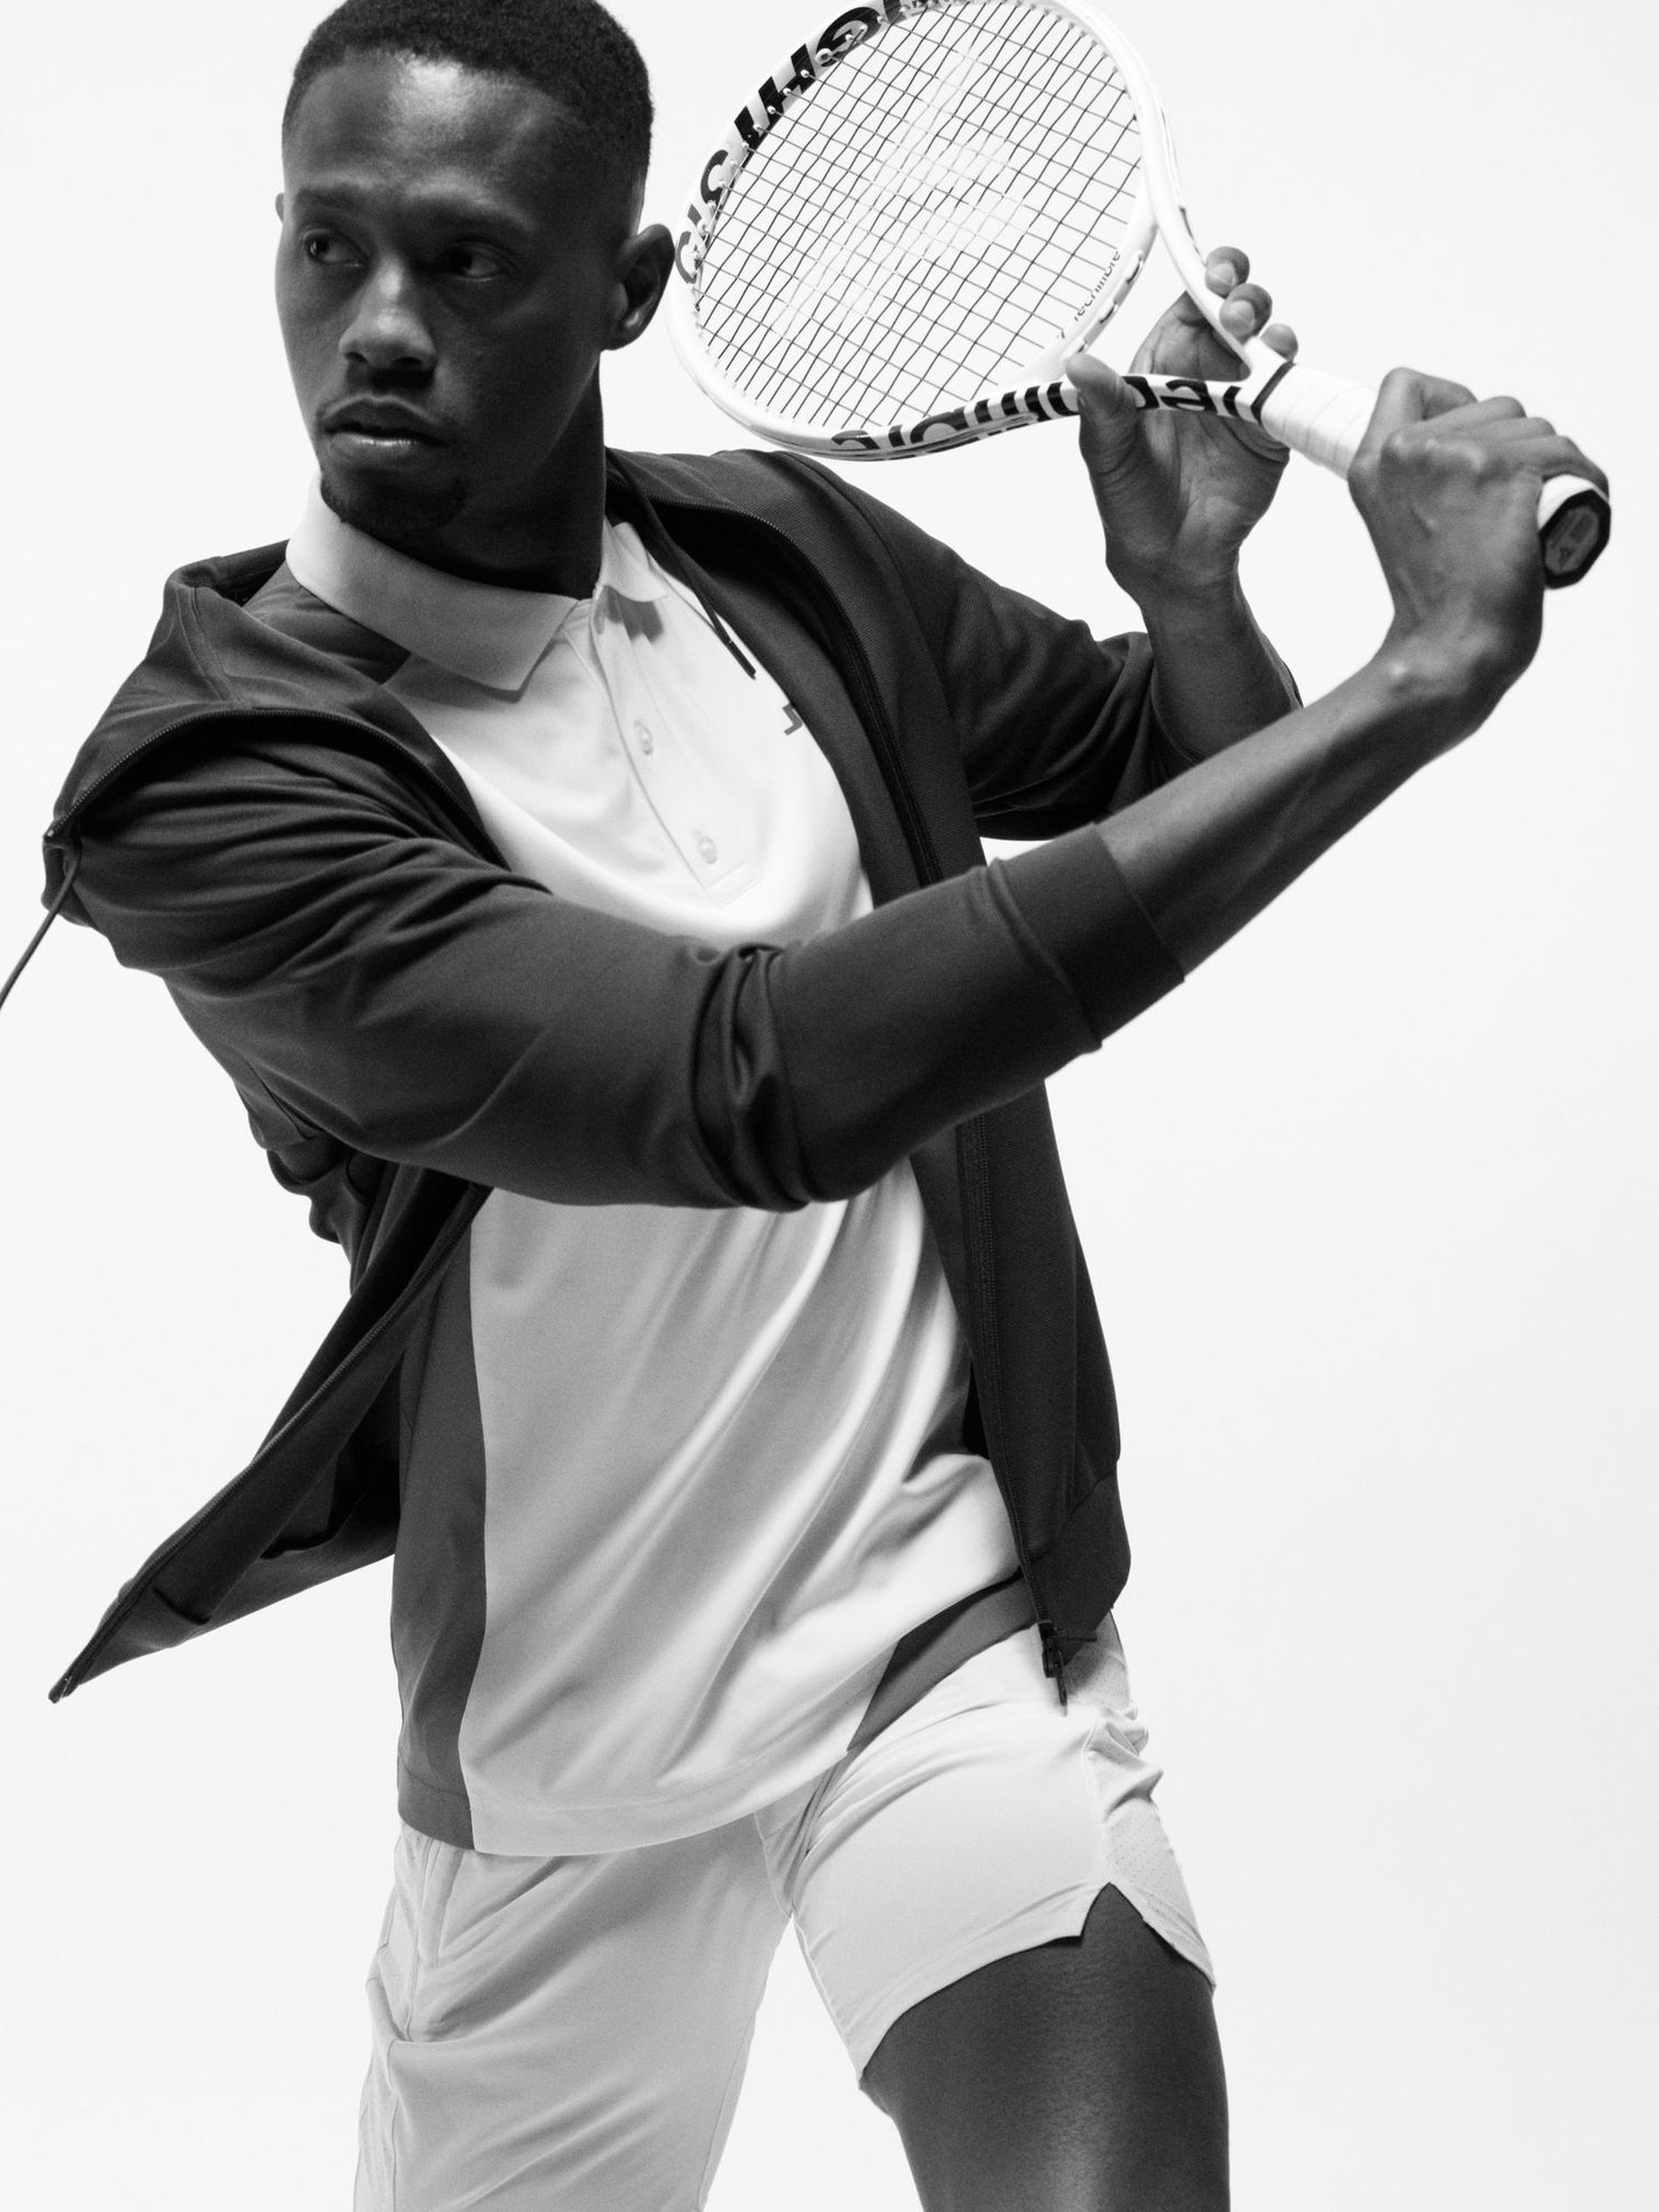 Chris Eubanks stars in J.Lindeberg's 2024 tennis collection campaign